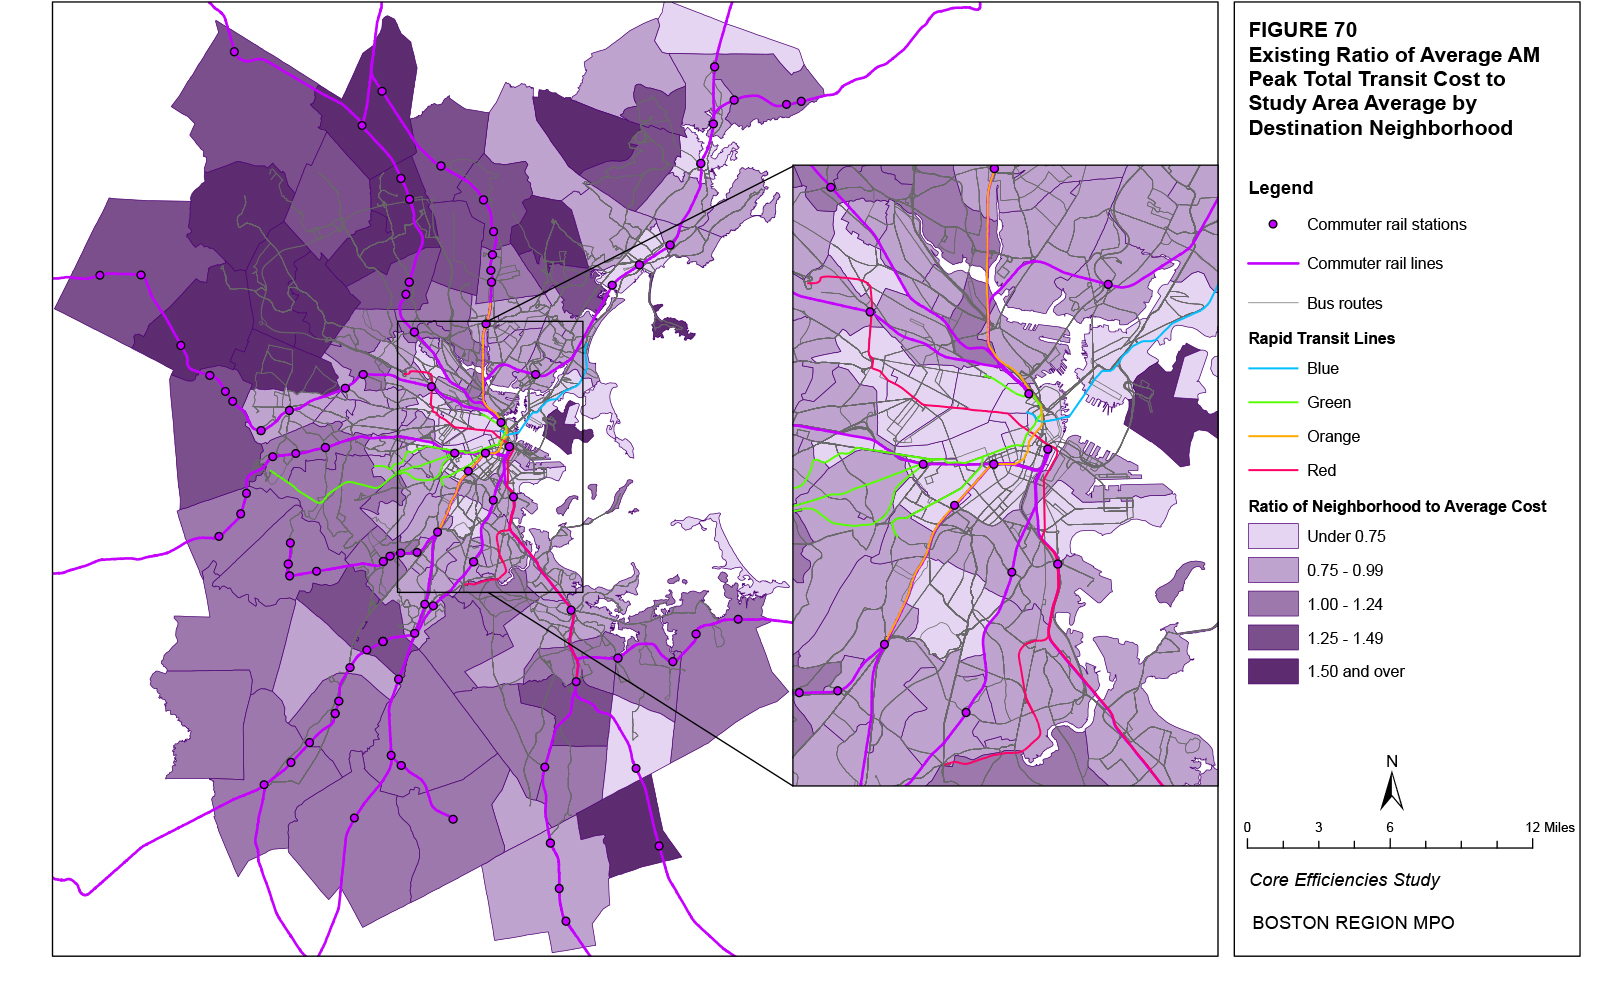 This map shows the existing average AM peak total transit costs for destination trips by neighborhood.